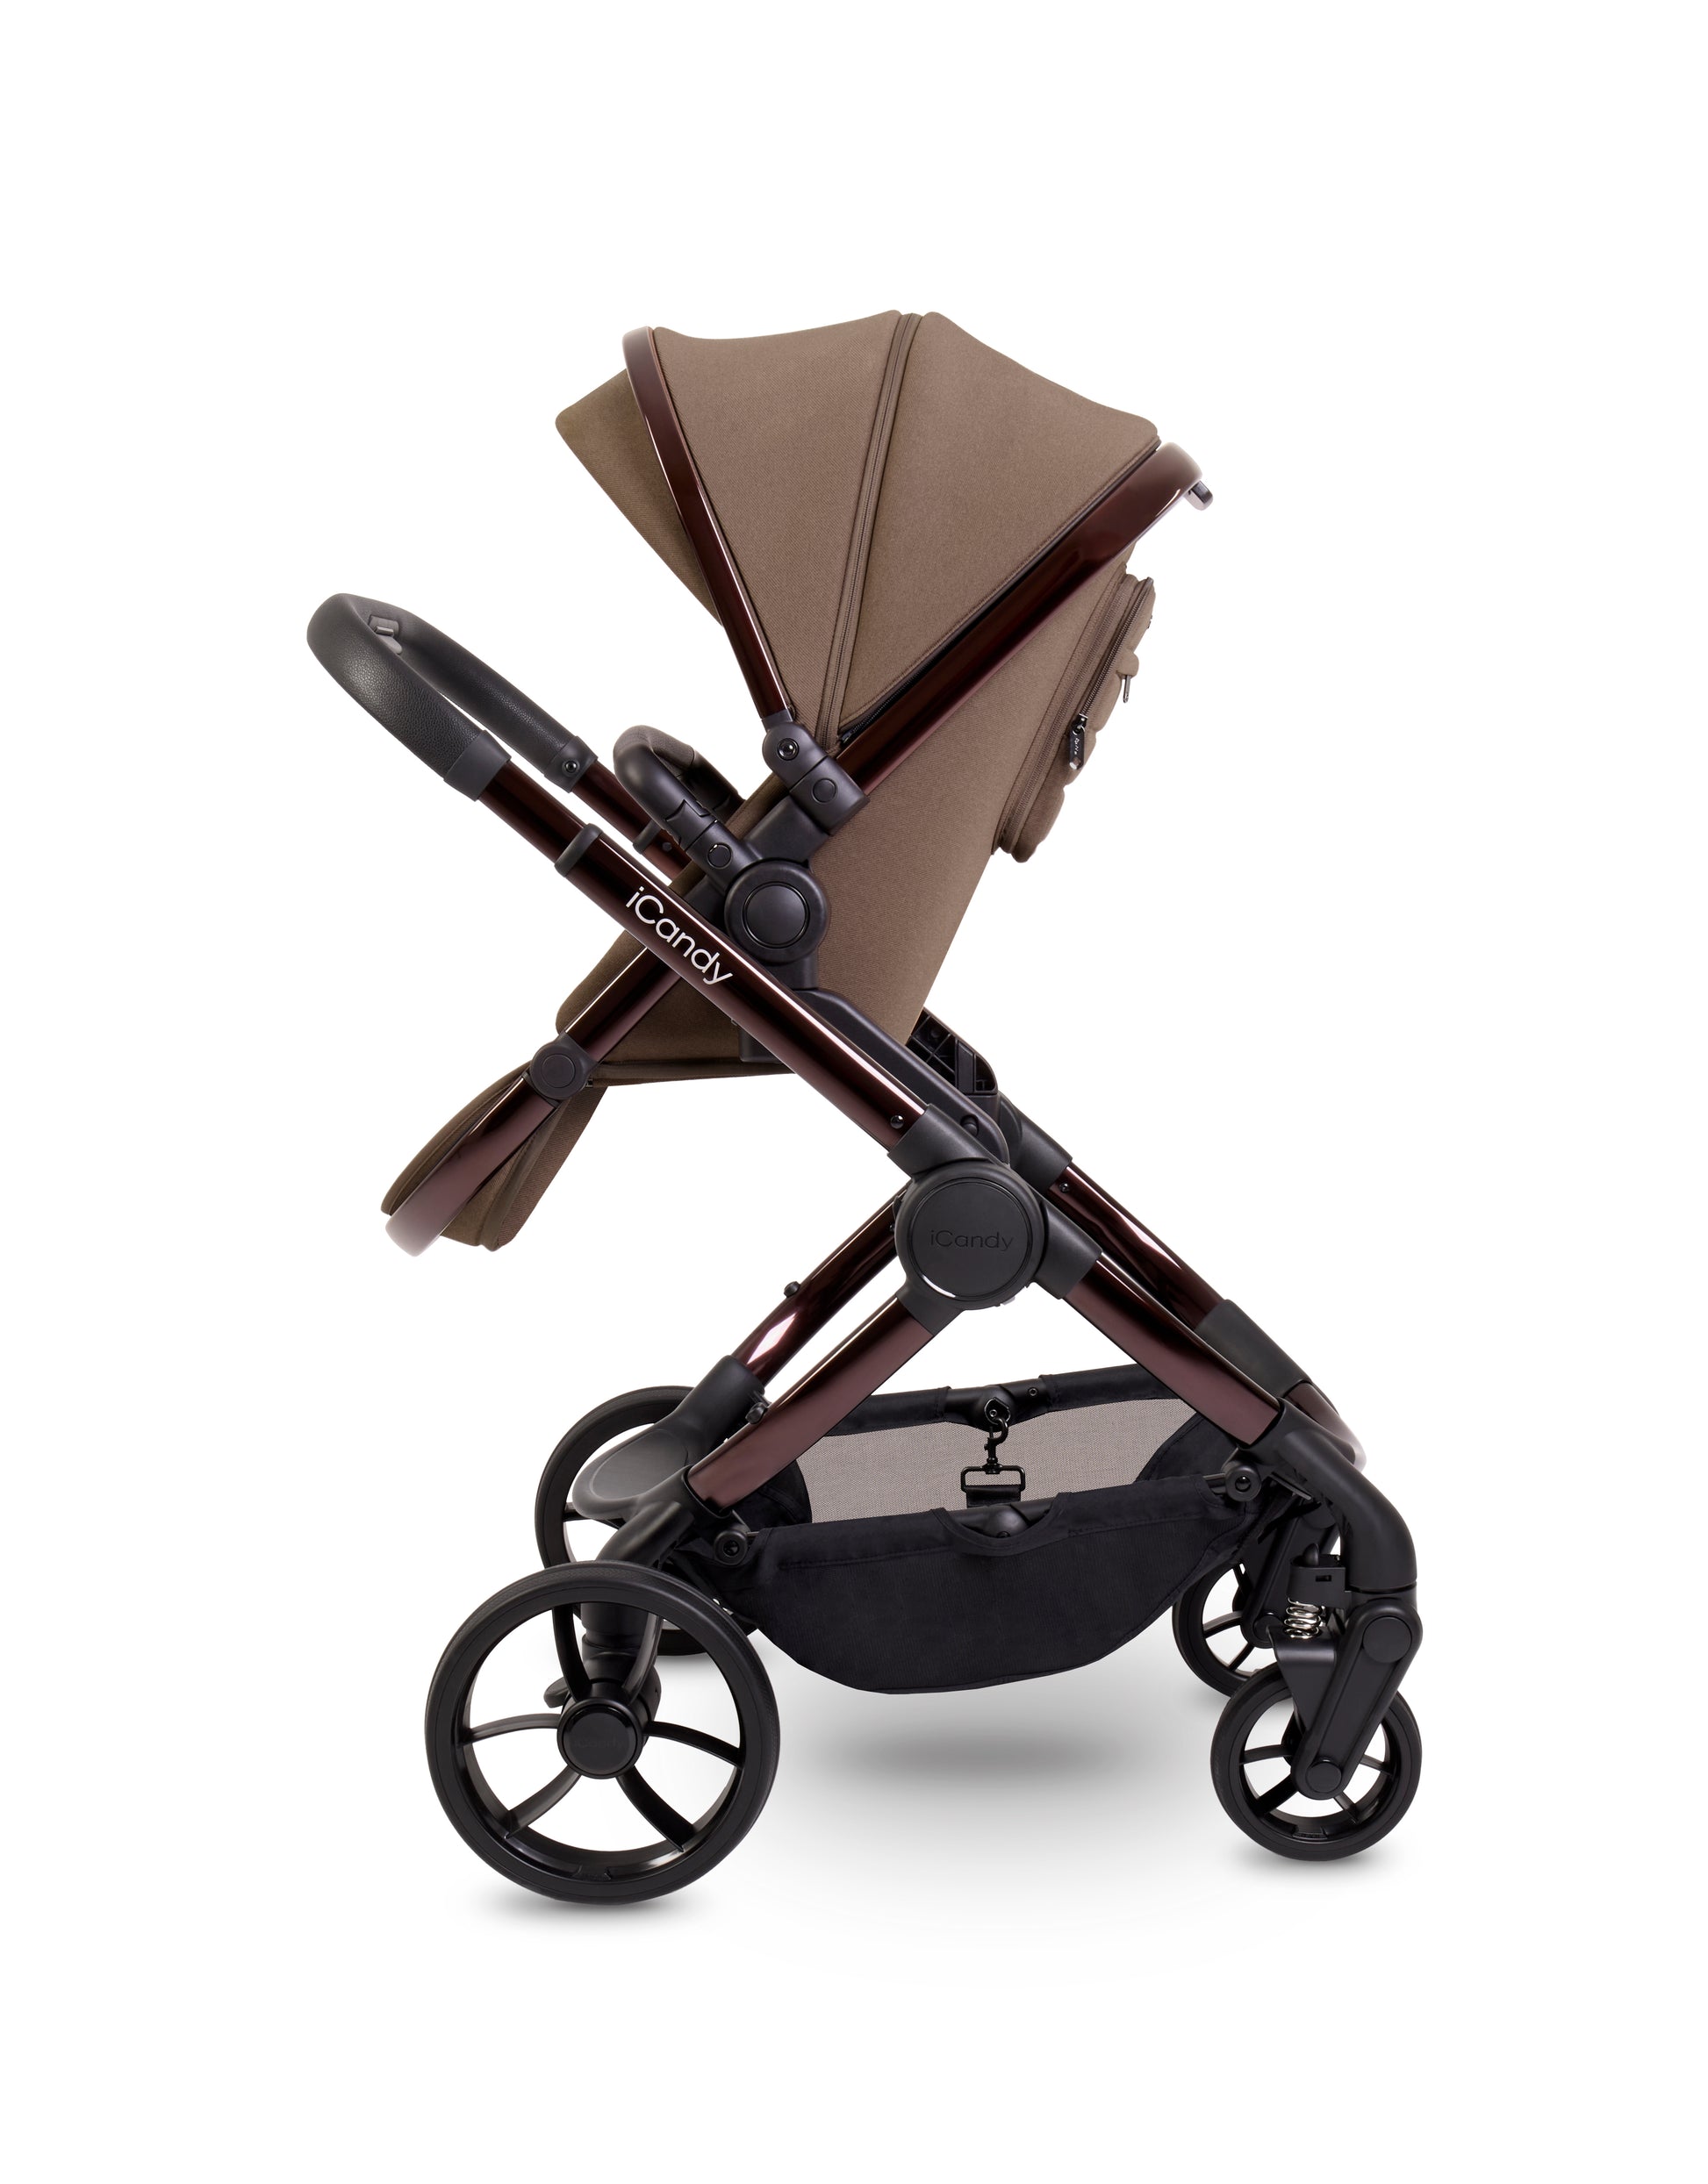 iCandy Peach 7 Pushchair Combo | Coco